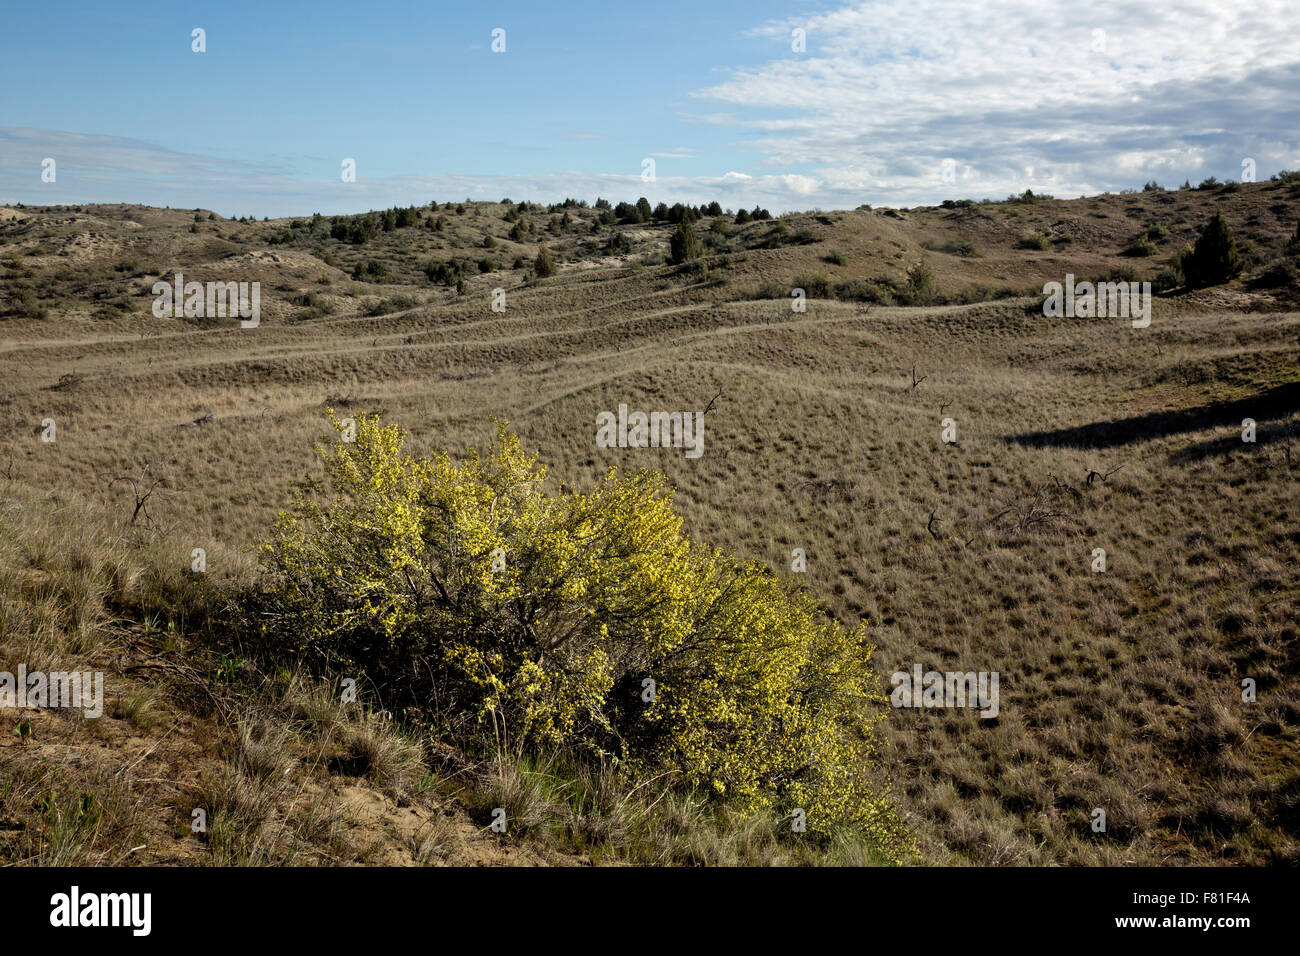 WASHINGTON - Grass covered dunes and gray rabbitbrush in bloom, spring time in the Juniper Dunes Wilderness area north of Pasco. Stock Photo